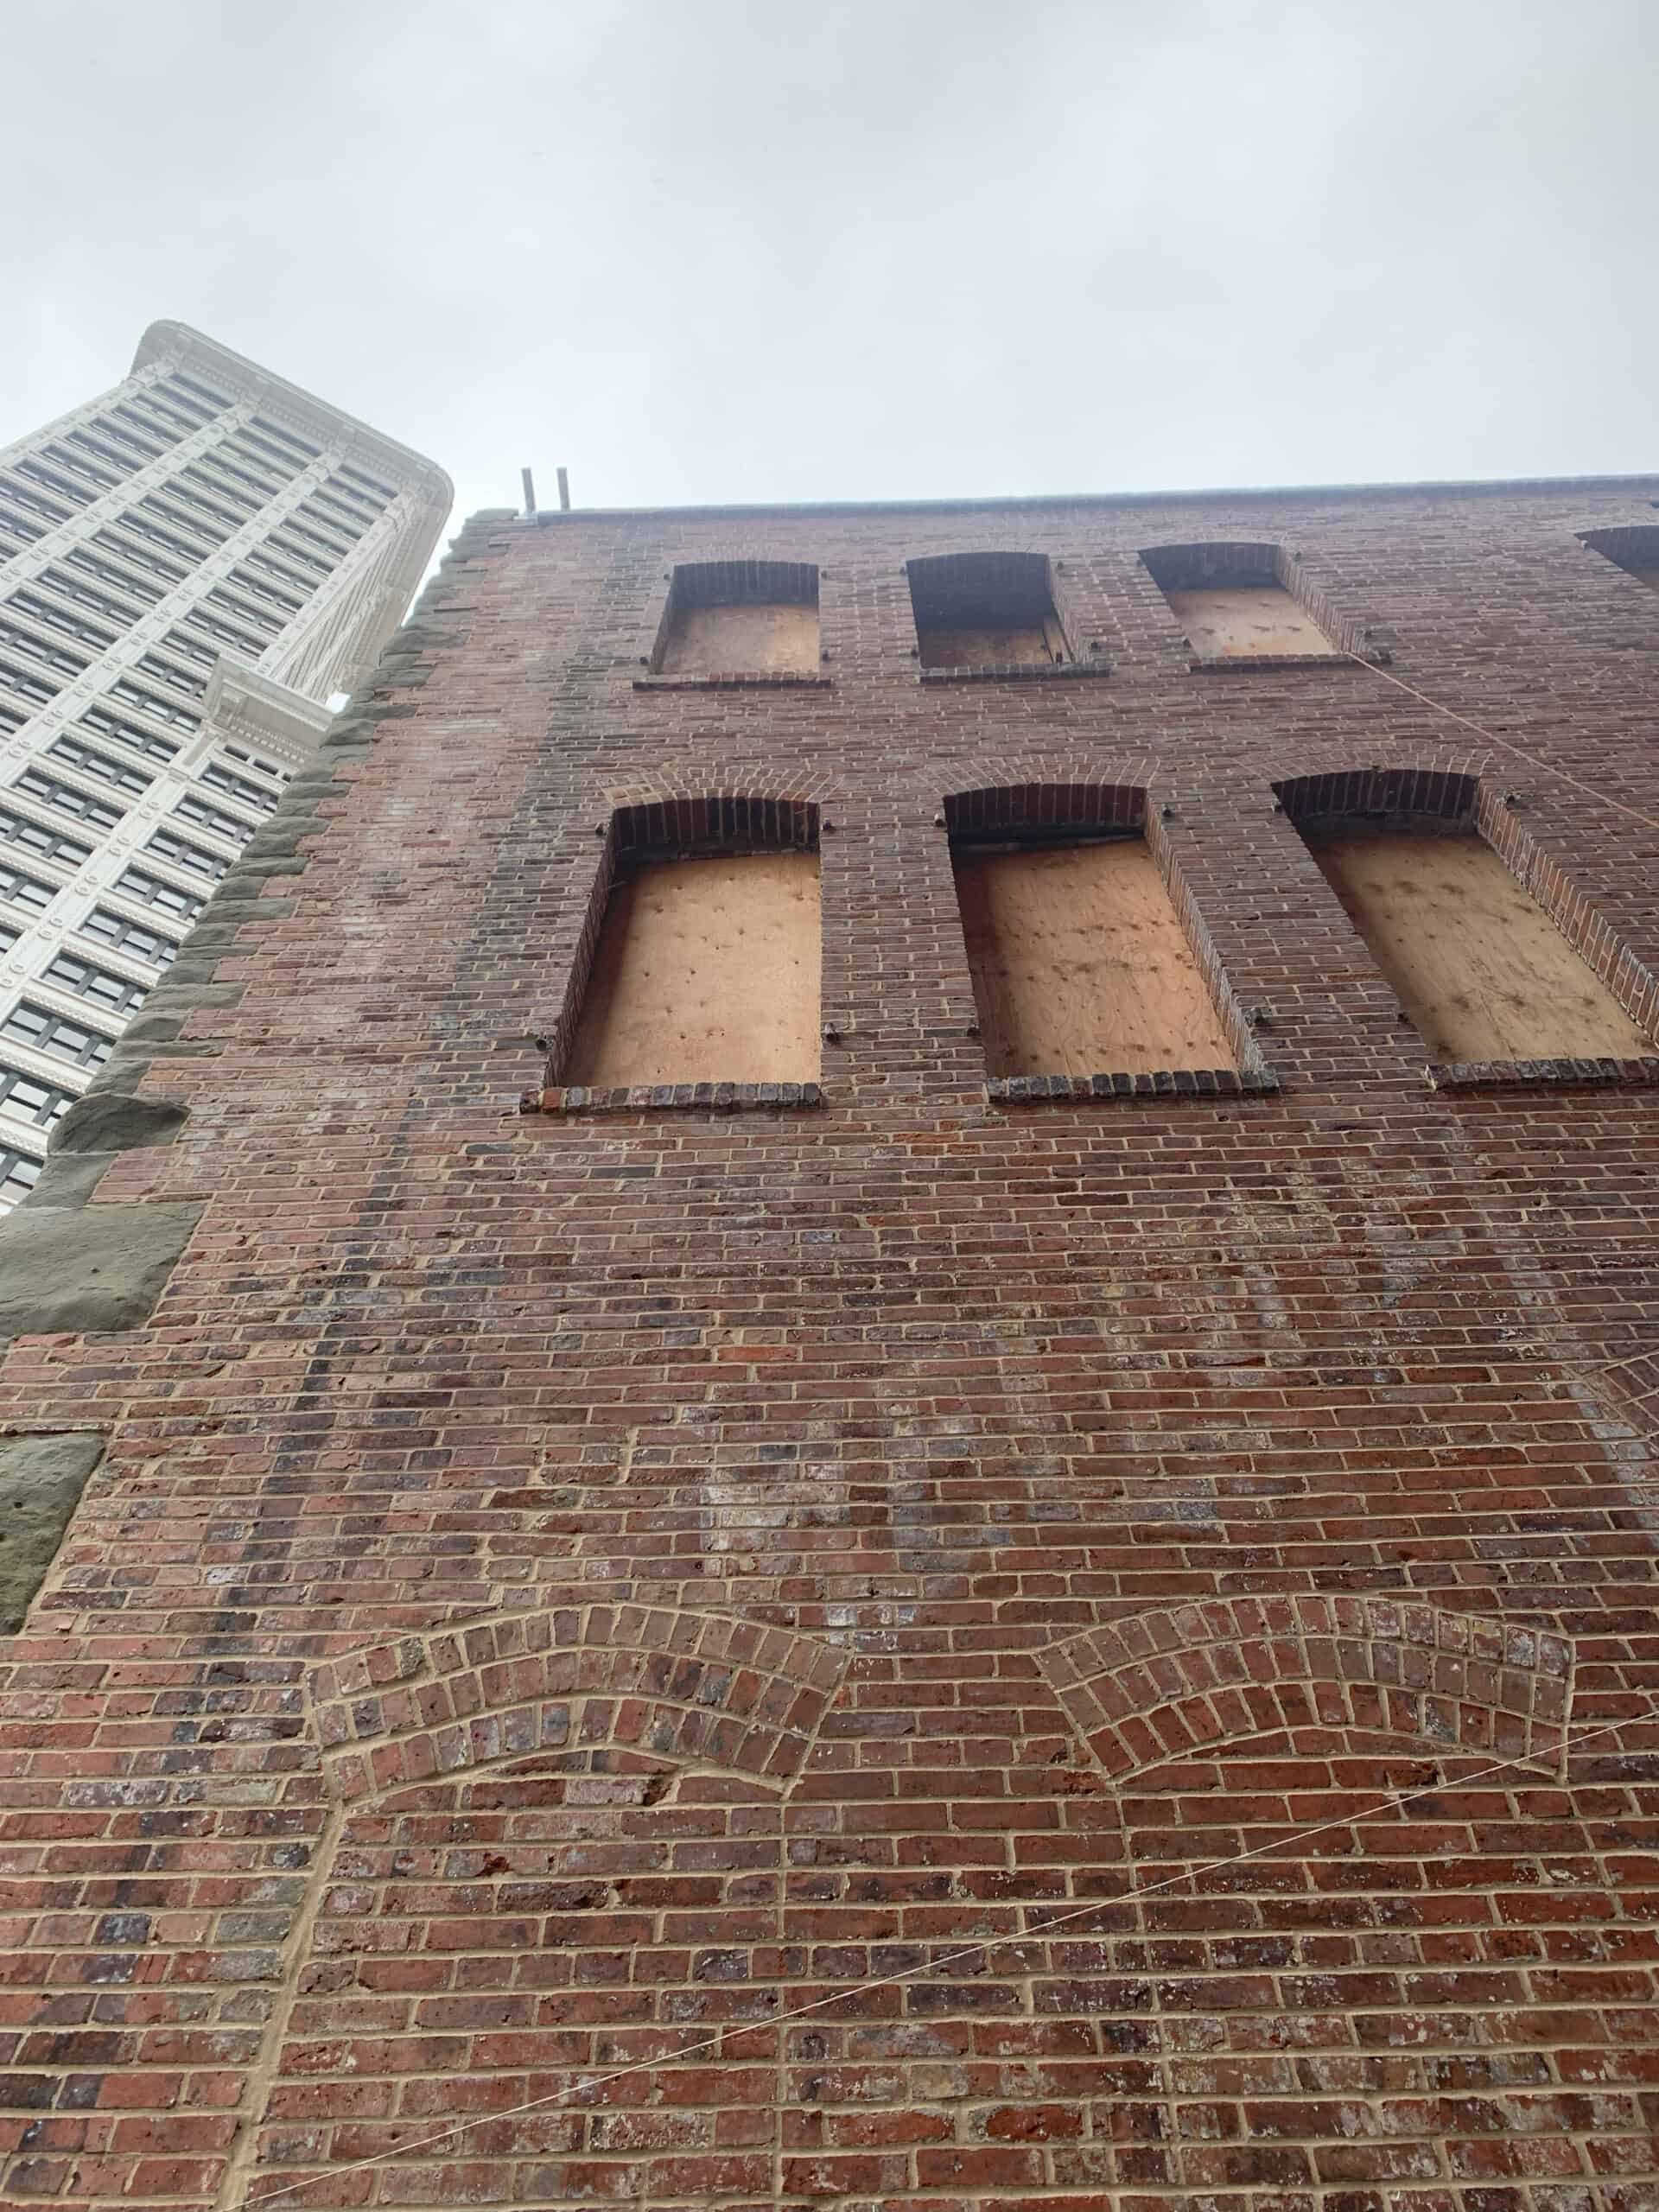 Interior and exterior brick walls were found in varying conditions. Photo courtesy BuildingWork